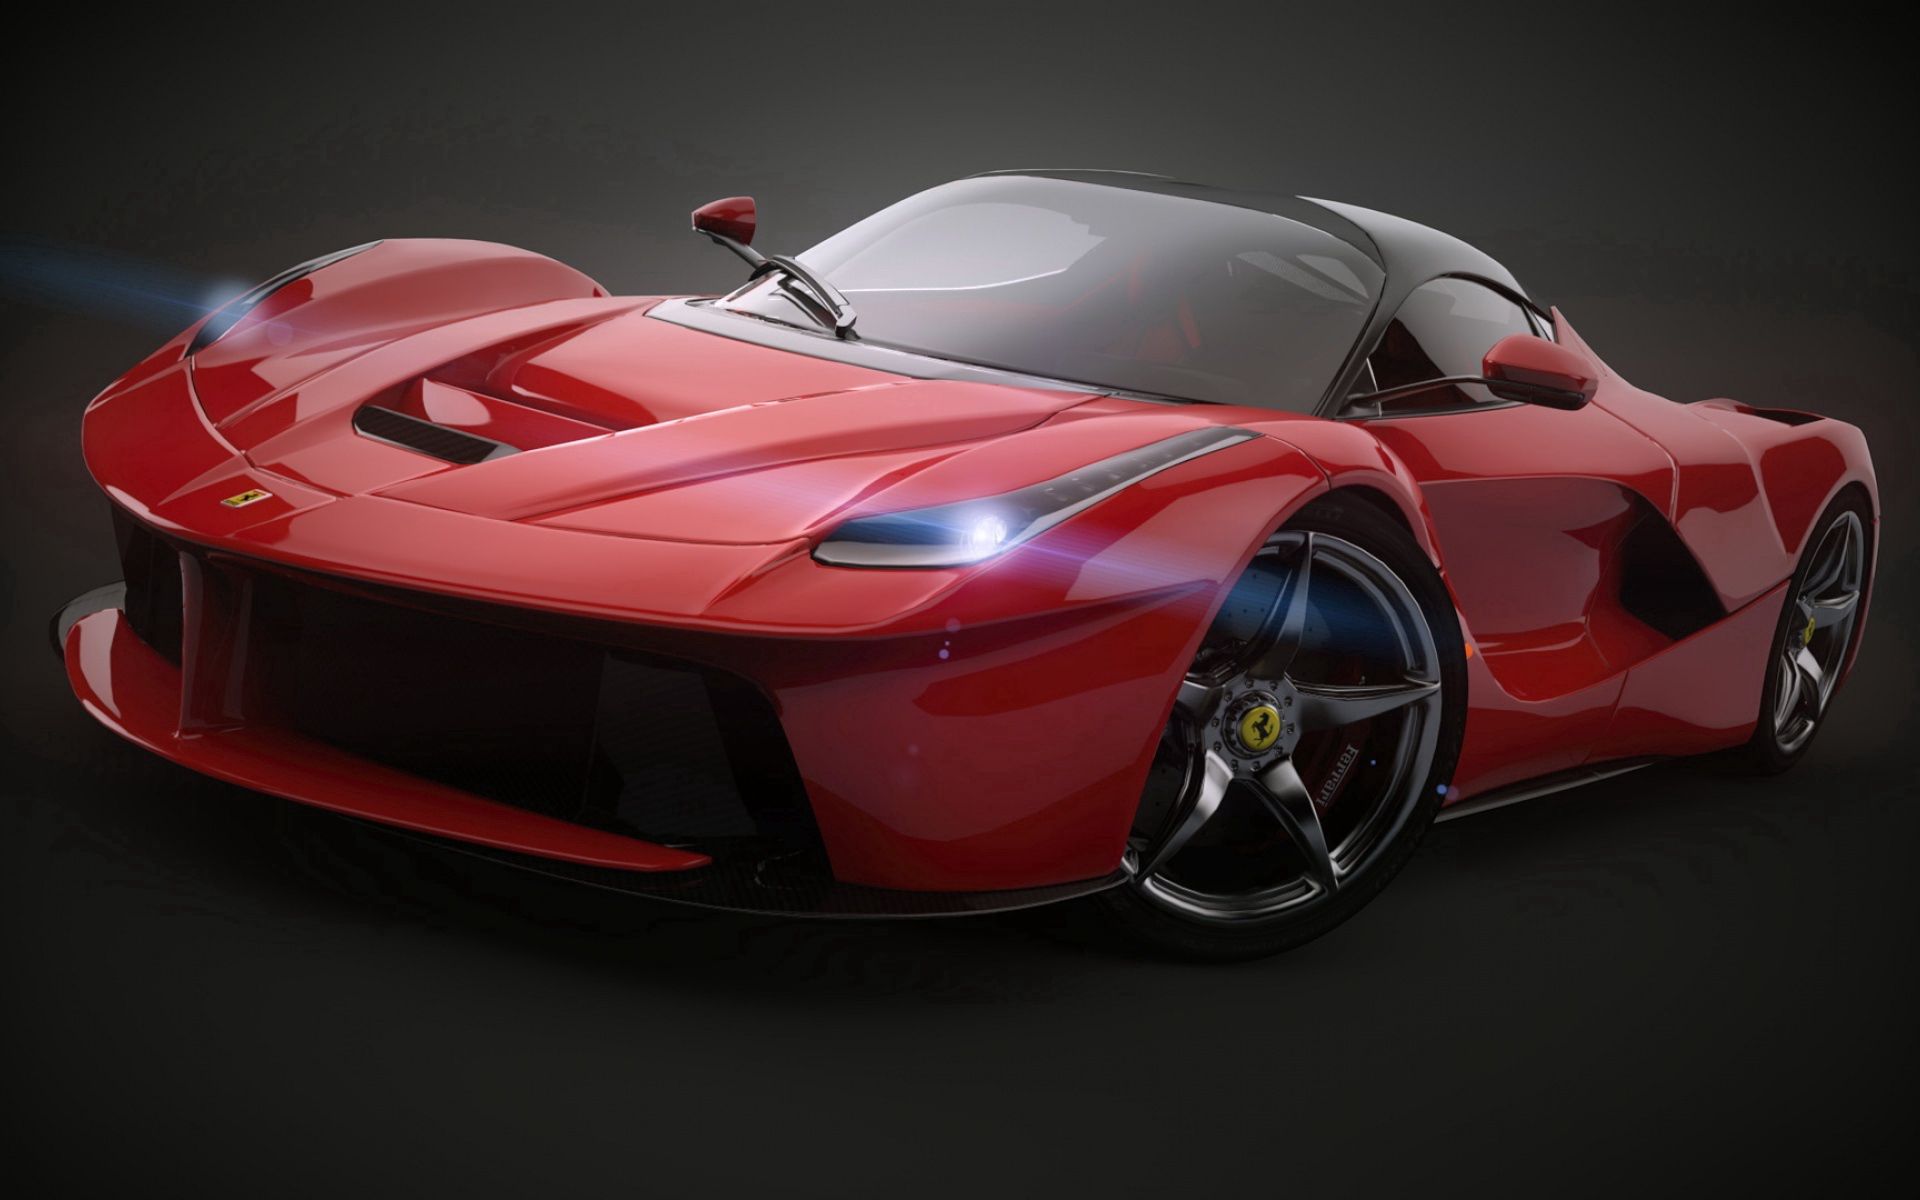 98471 download wallpaper ferrari, cars, red, 2014, side view, laferrari screensavers and pictures for free